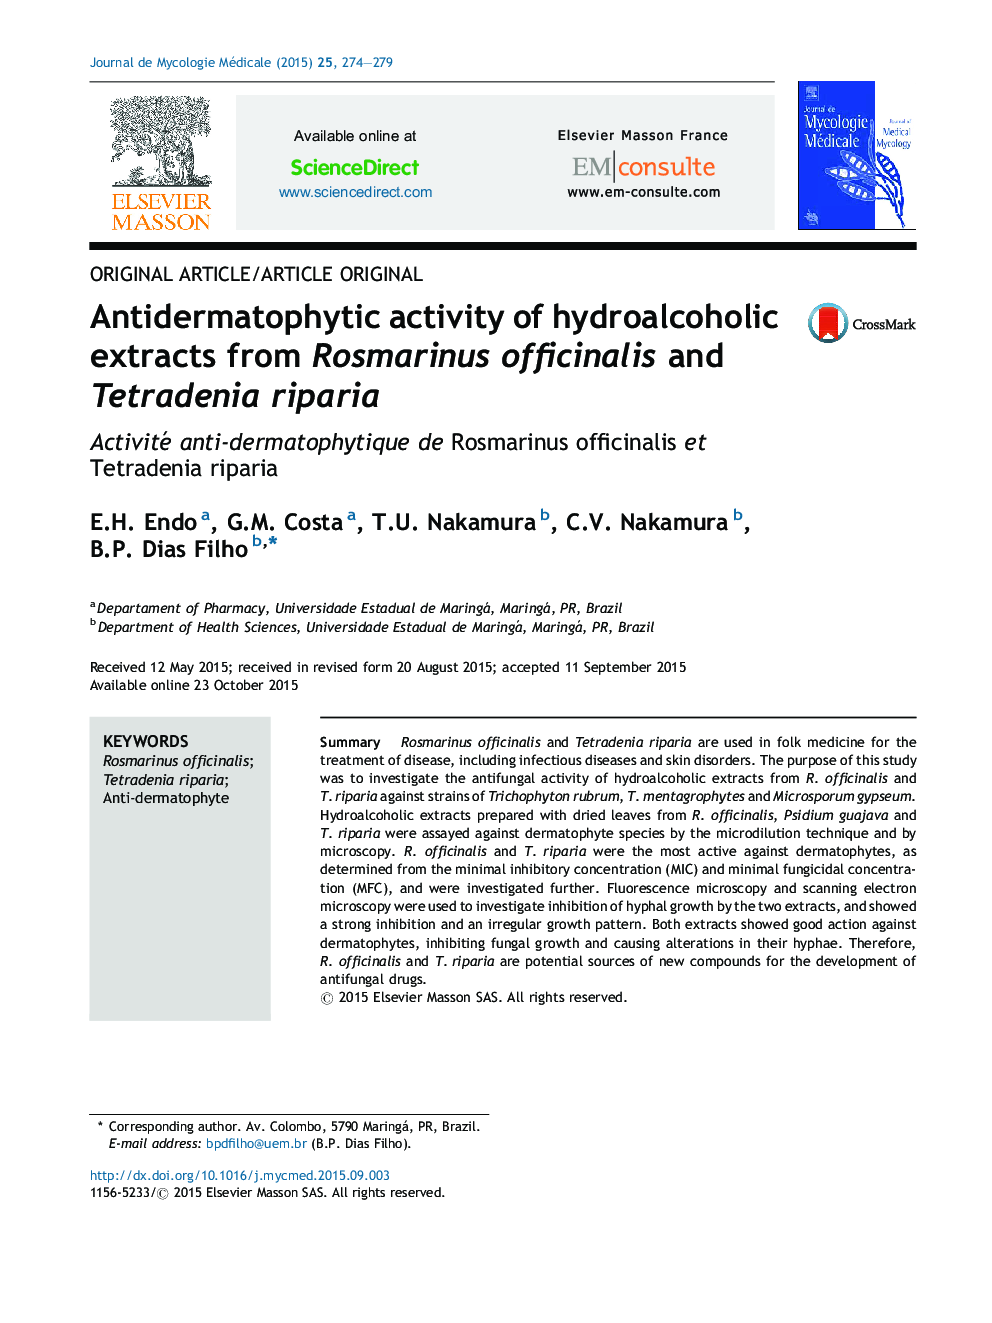 Antidermatophytic activity of hydroalcoholic extracts from Rosmarinus officinalis and Tetradenia riparia